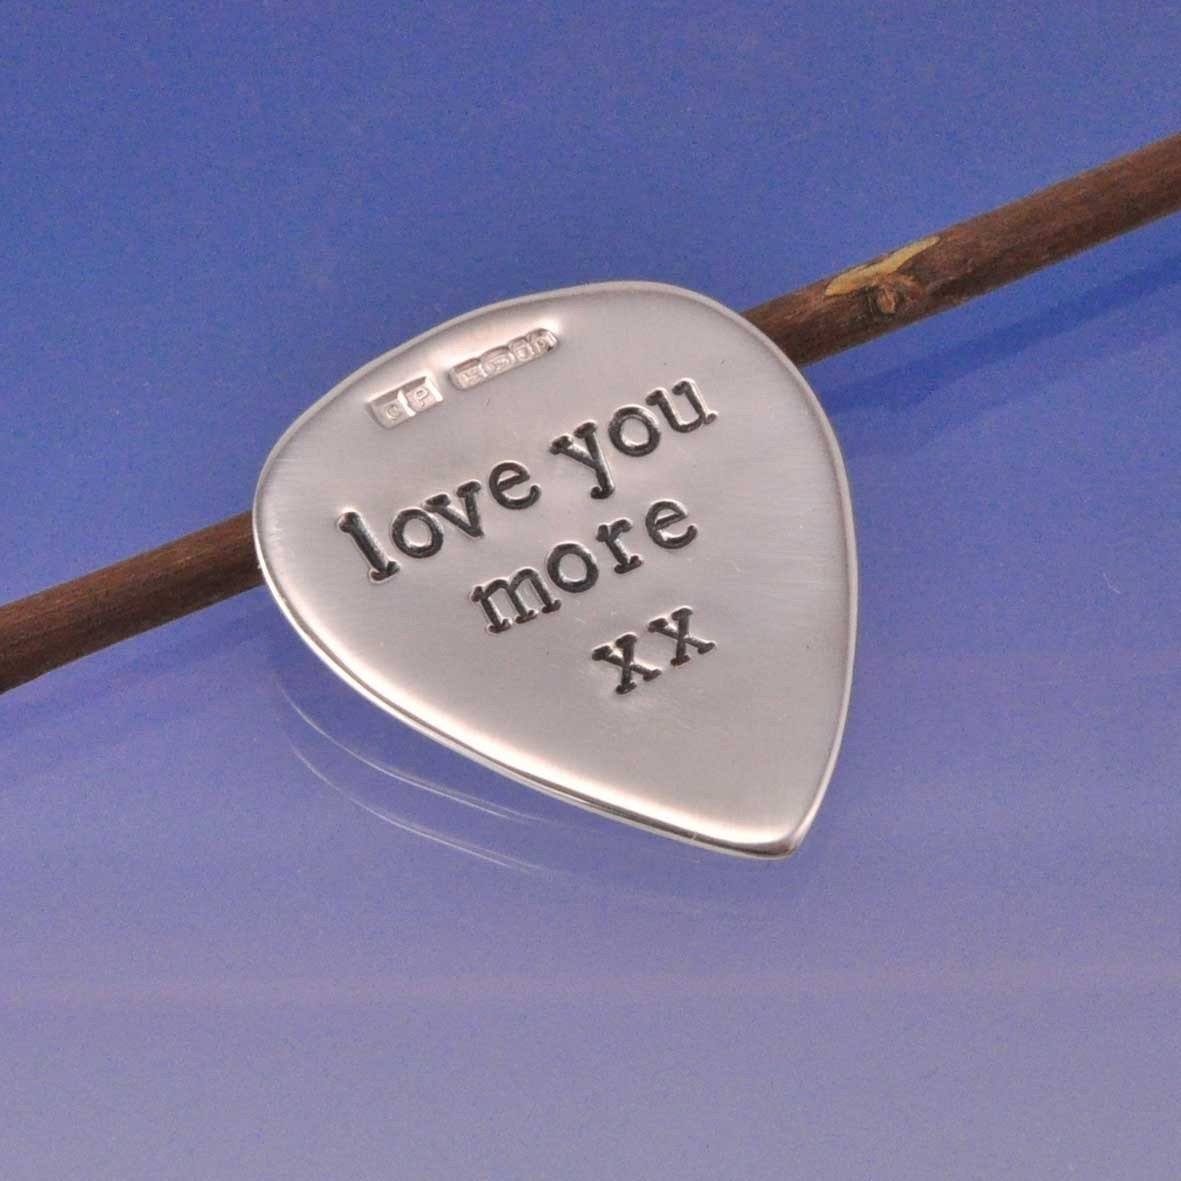 Guitar Plectrum - Personalised Inscription Silverware by Chris Parry Jewellery